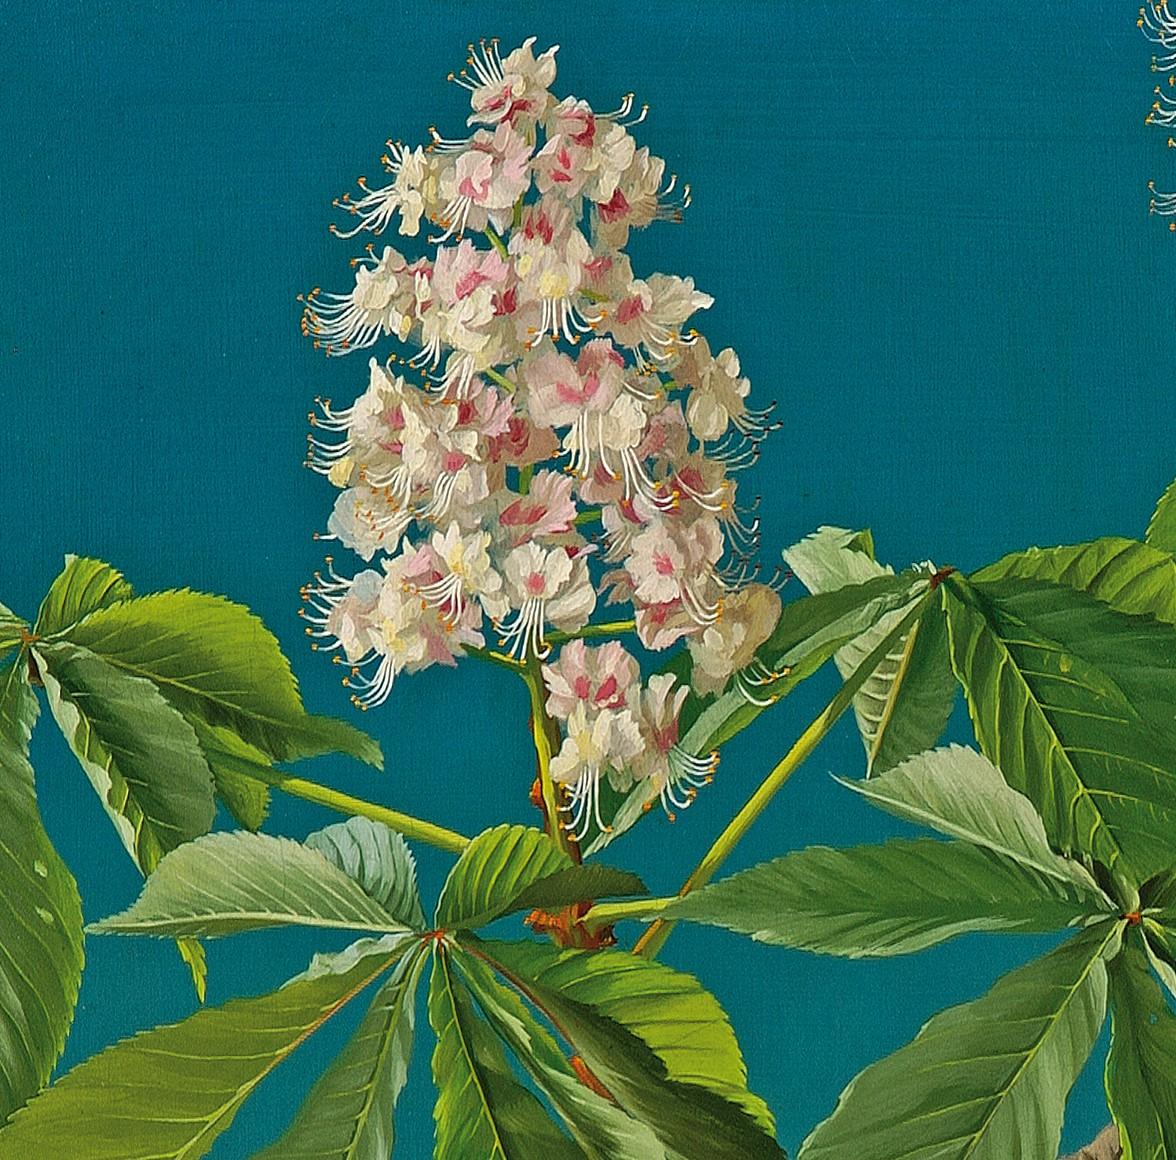 Blossom branche - Painting by Lodewyk Bruckman